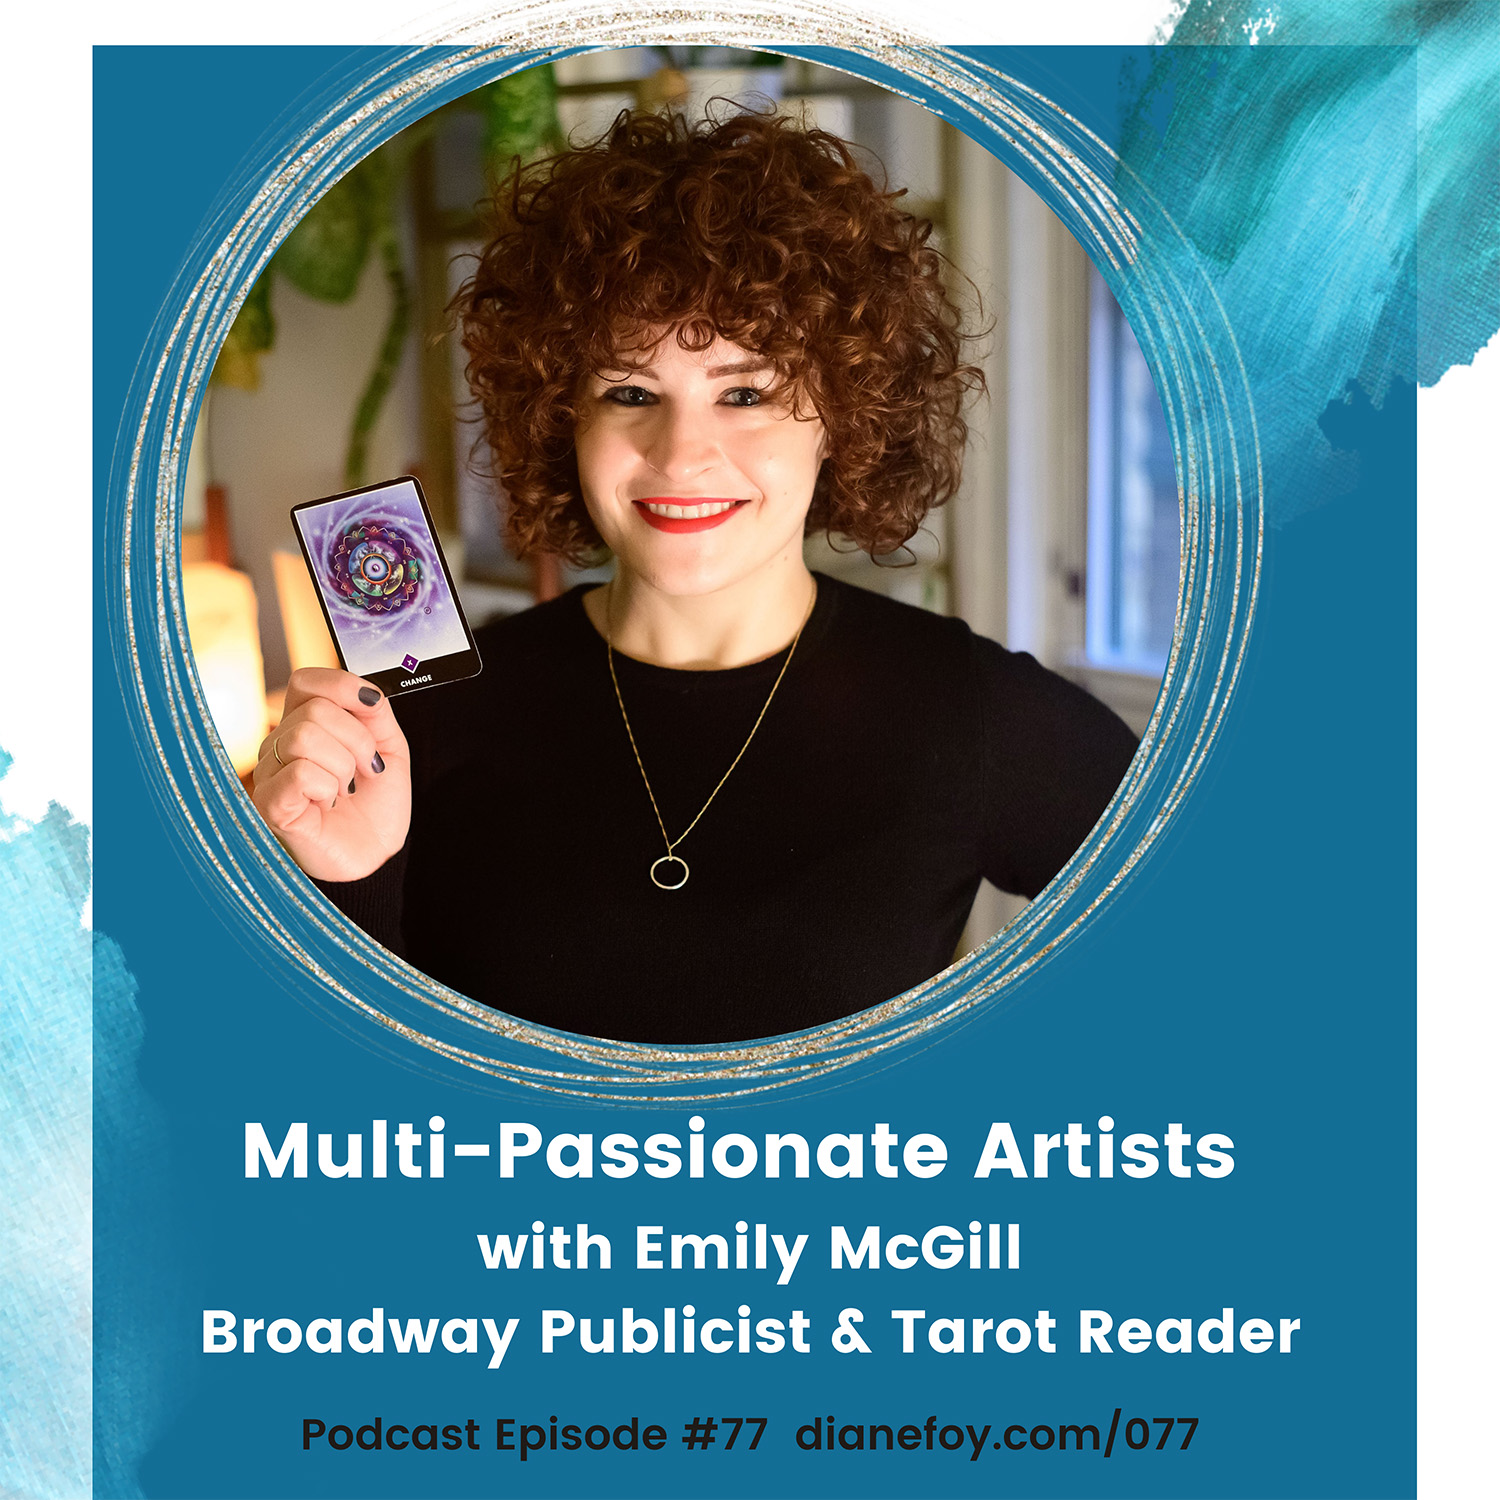 Broadway Publicist & Tarot Reader Emily McGill on Multi-passionate artists podcast